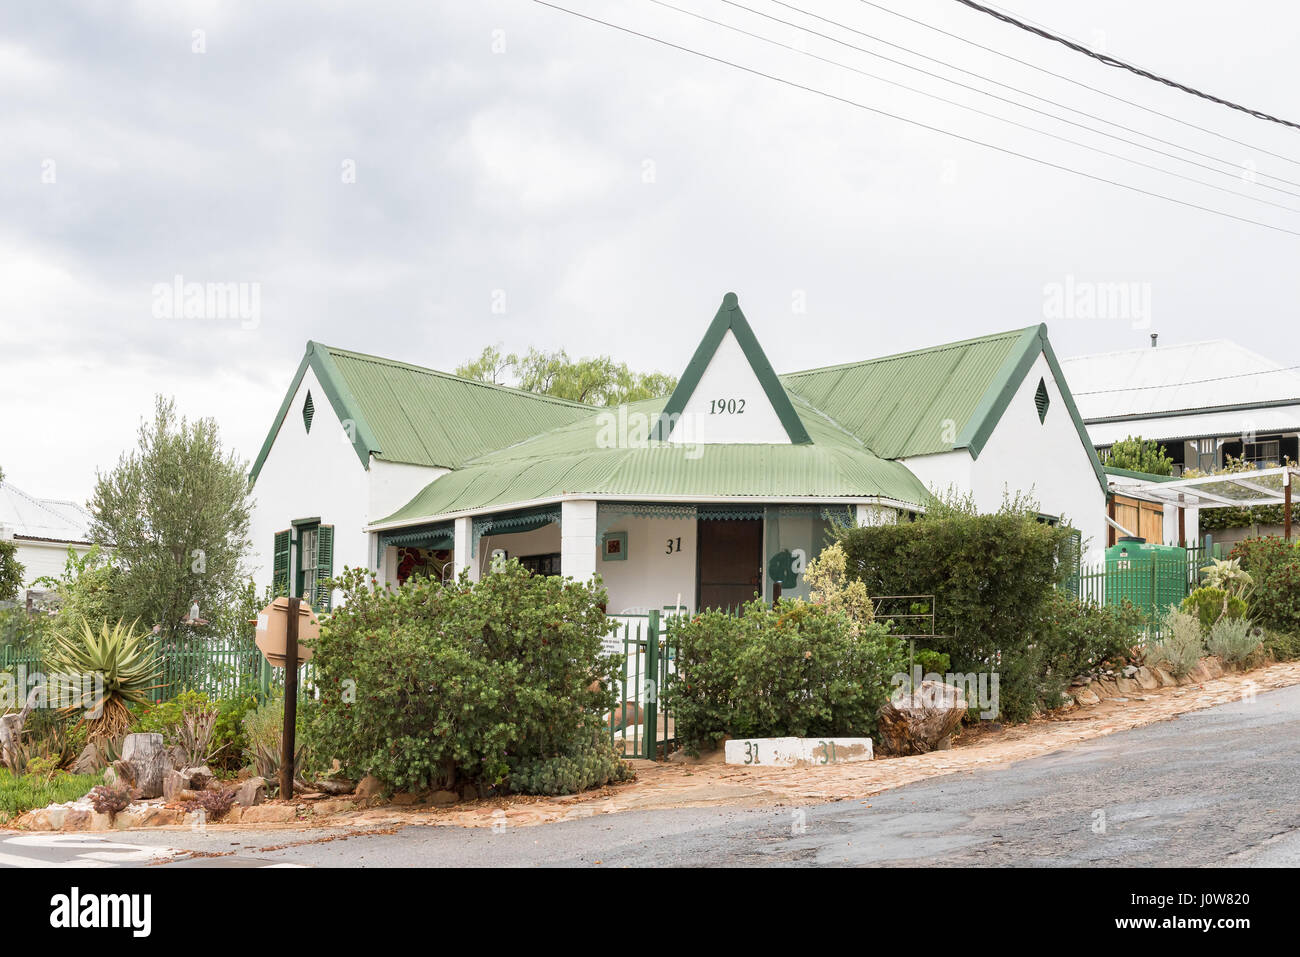 DE RUST, SOUTH AFRICA - MARCH 23, 2017: An historic old house, built 1902, in De Rust, a village in the Western Cape Province of South Africa Stock Photo